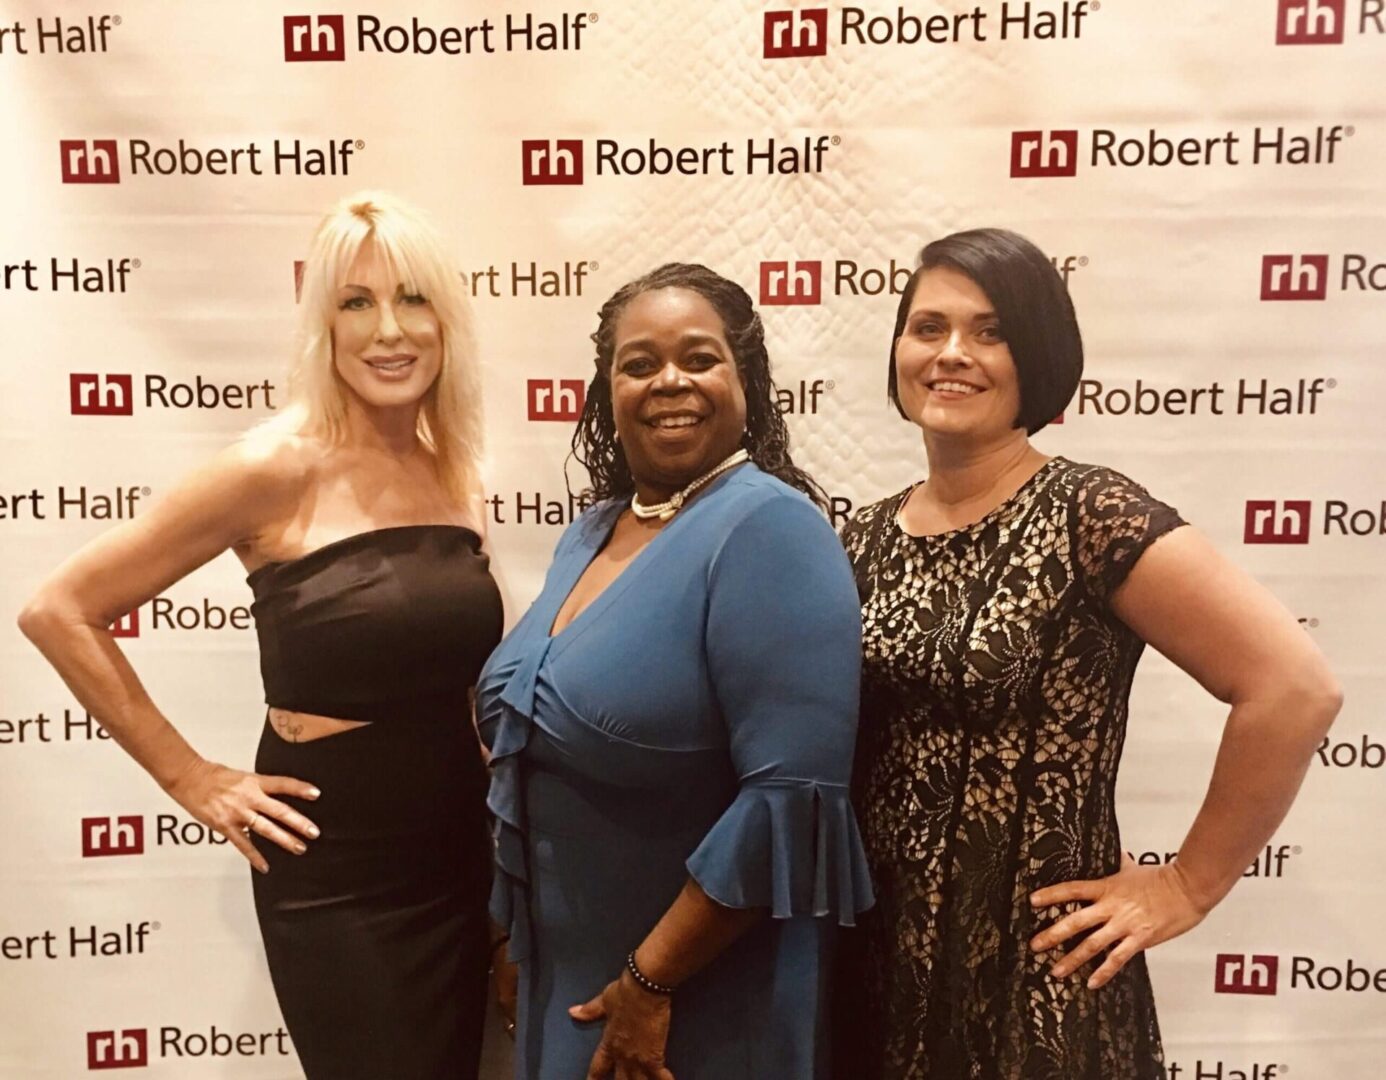 WBENC Conference 2019